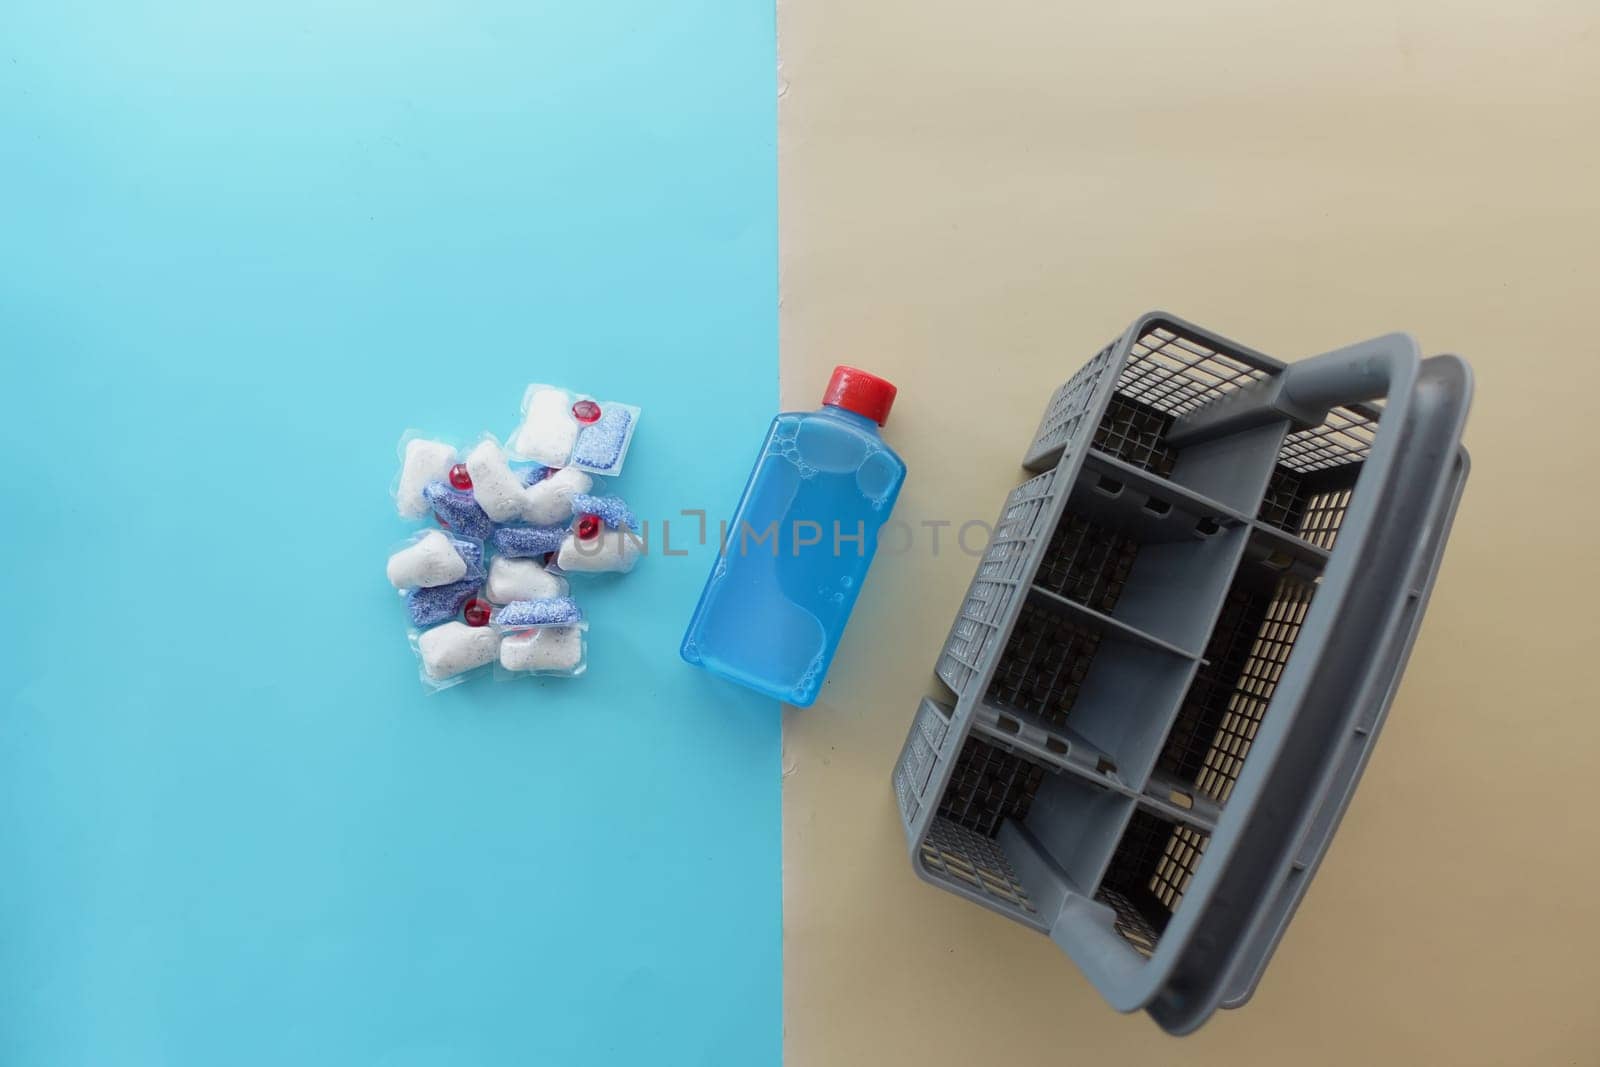 A stack of dishwasher tablets and a bottle of detergent on a blue background.